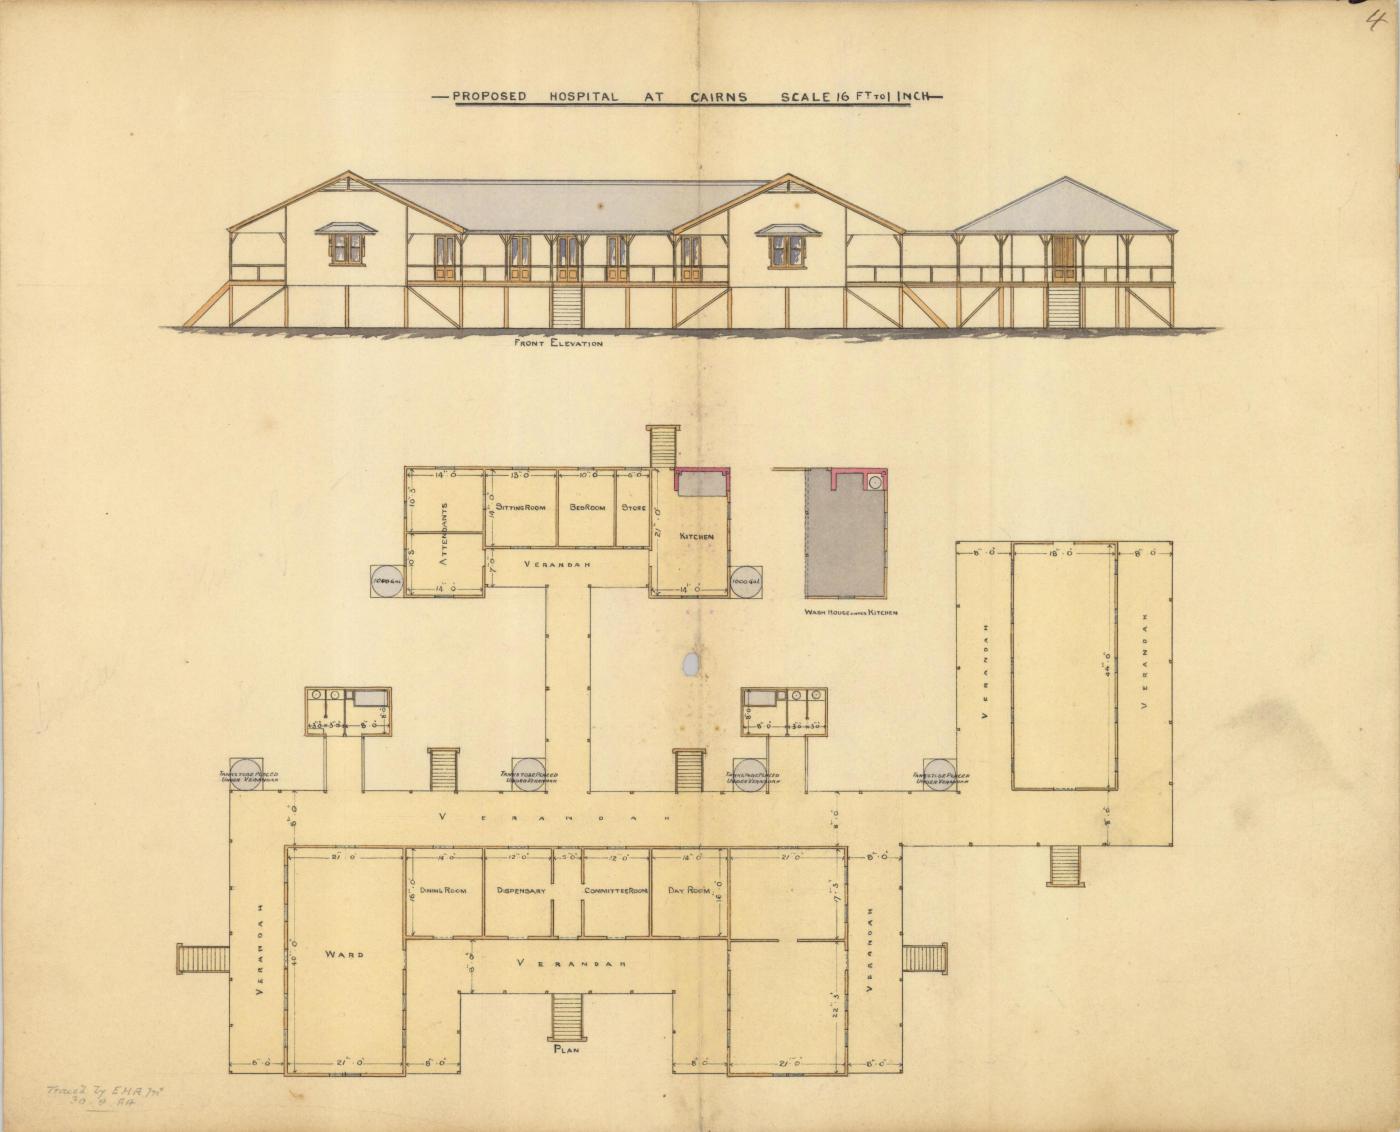 Architectural drawing of the proposed Hospital, Cairns